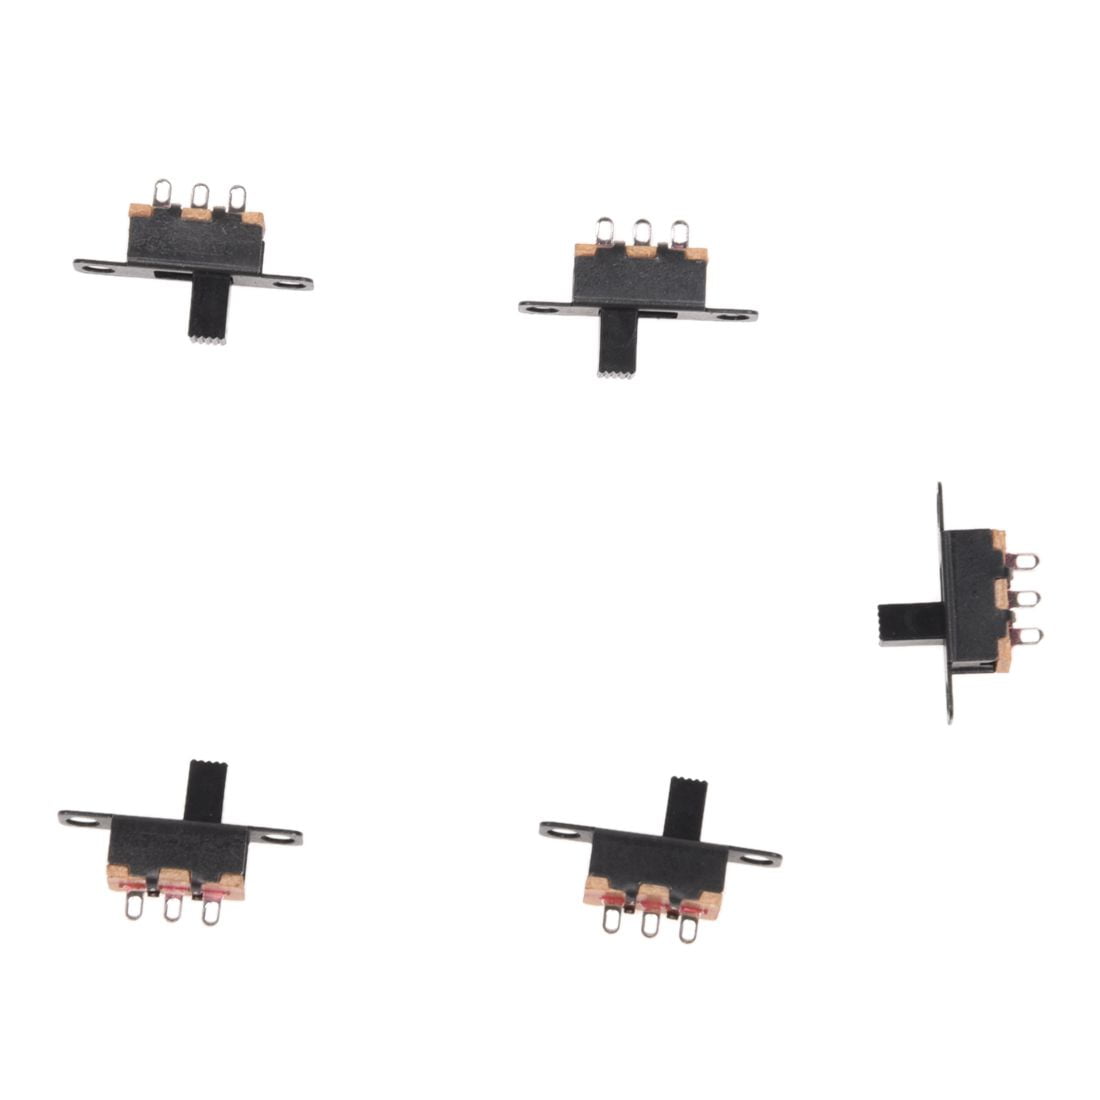 5 Pcs 50V 0.5A 3 Pin 2 Position On/OFF 1P2T SPDT Slide Switch 3 Pin AD 